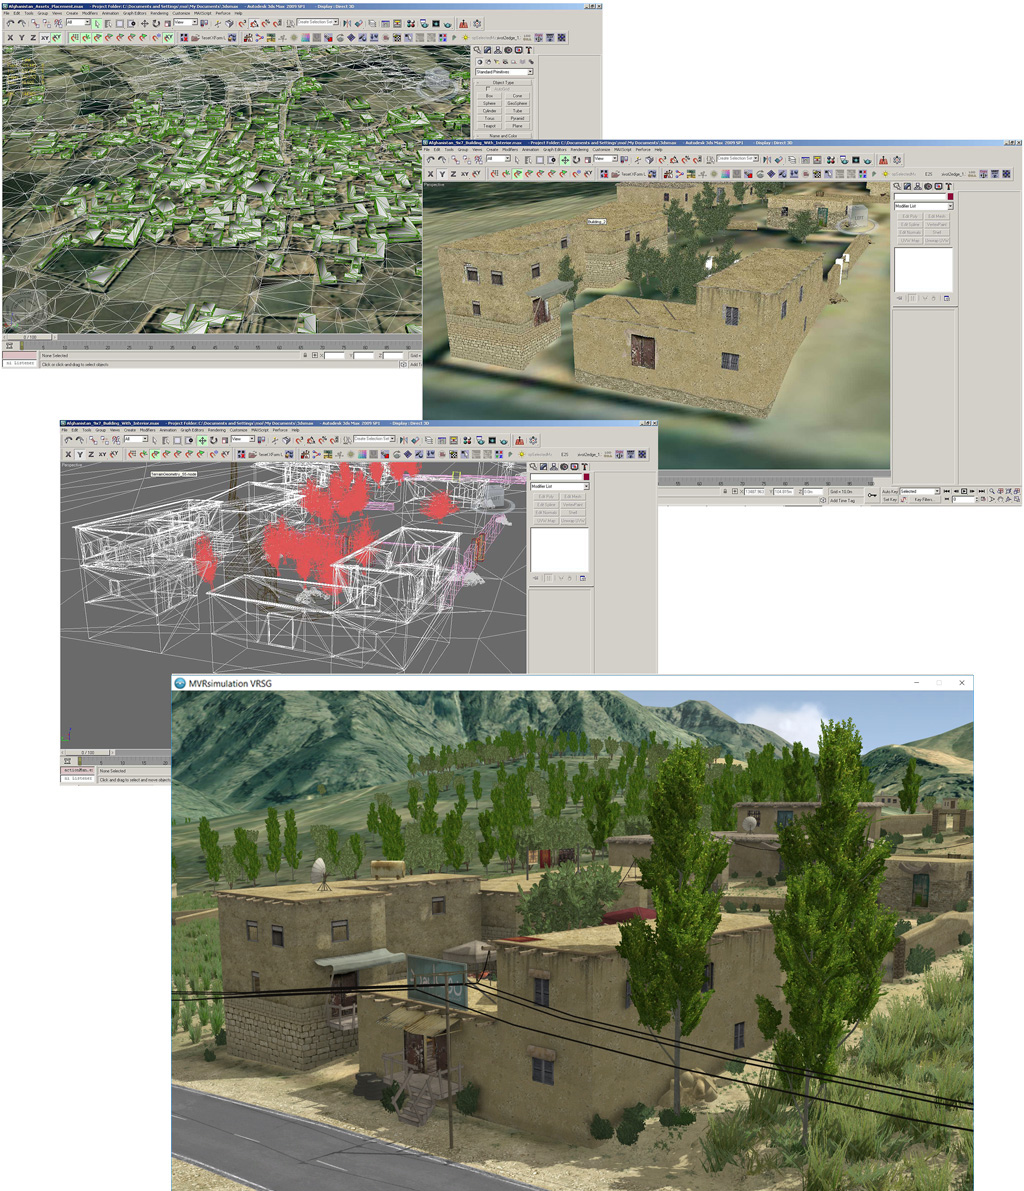 Constructing high-resolution, photorealistic buildings for MVRsimulation's virtual Afghanistan terrain in Autodesk 3ds Max.